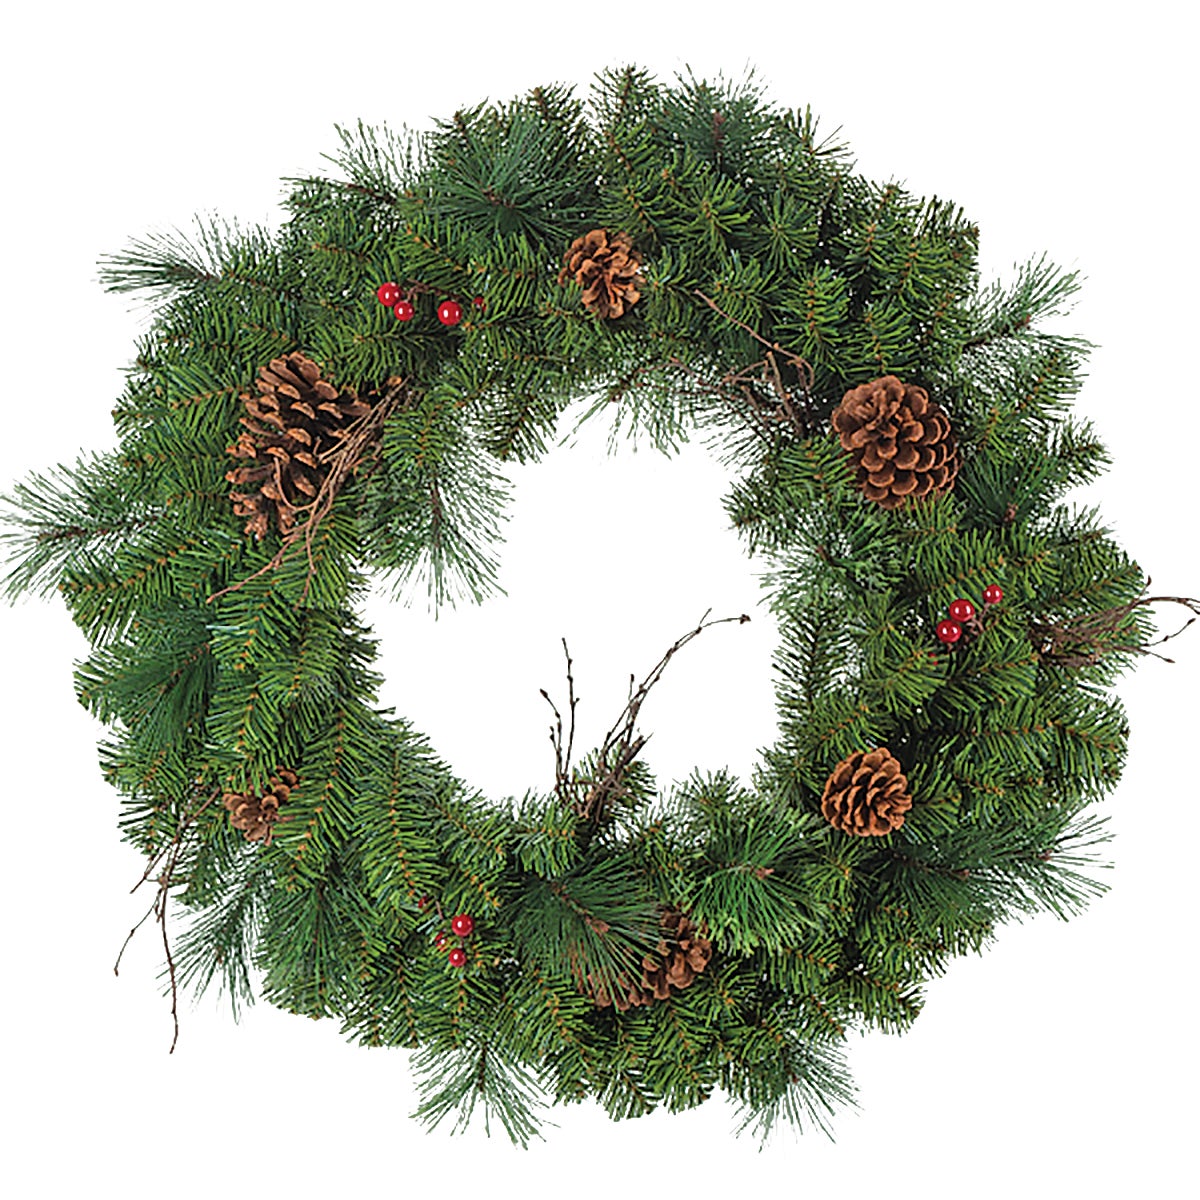 Item 954282, 30-inch mixed pine wreath. Features berries, cones, and twigs.